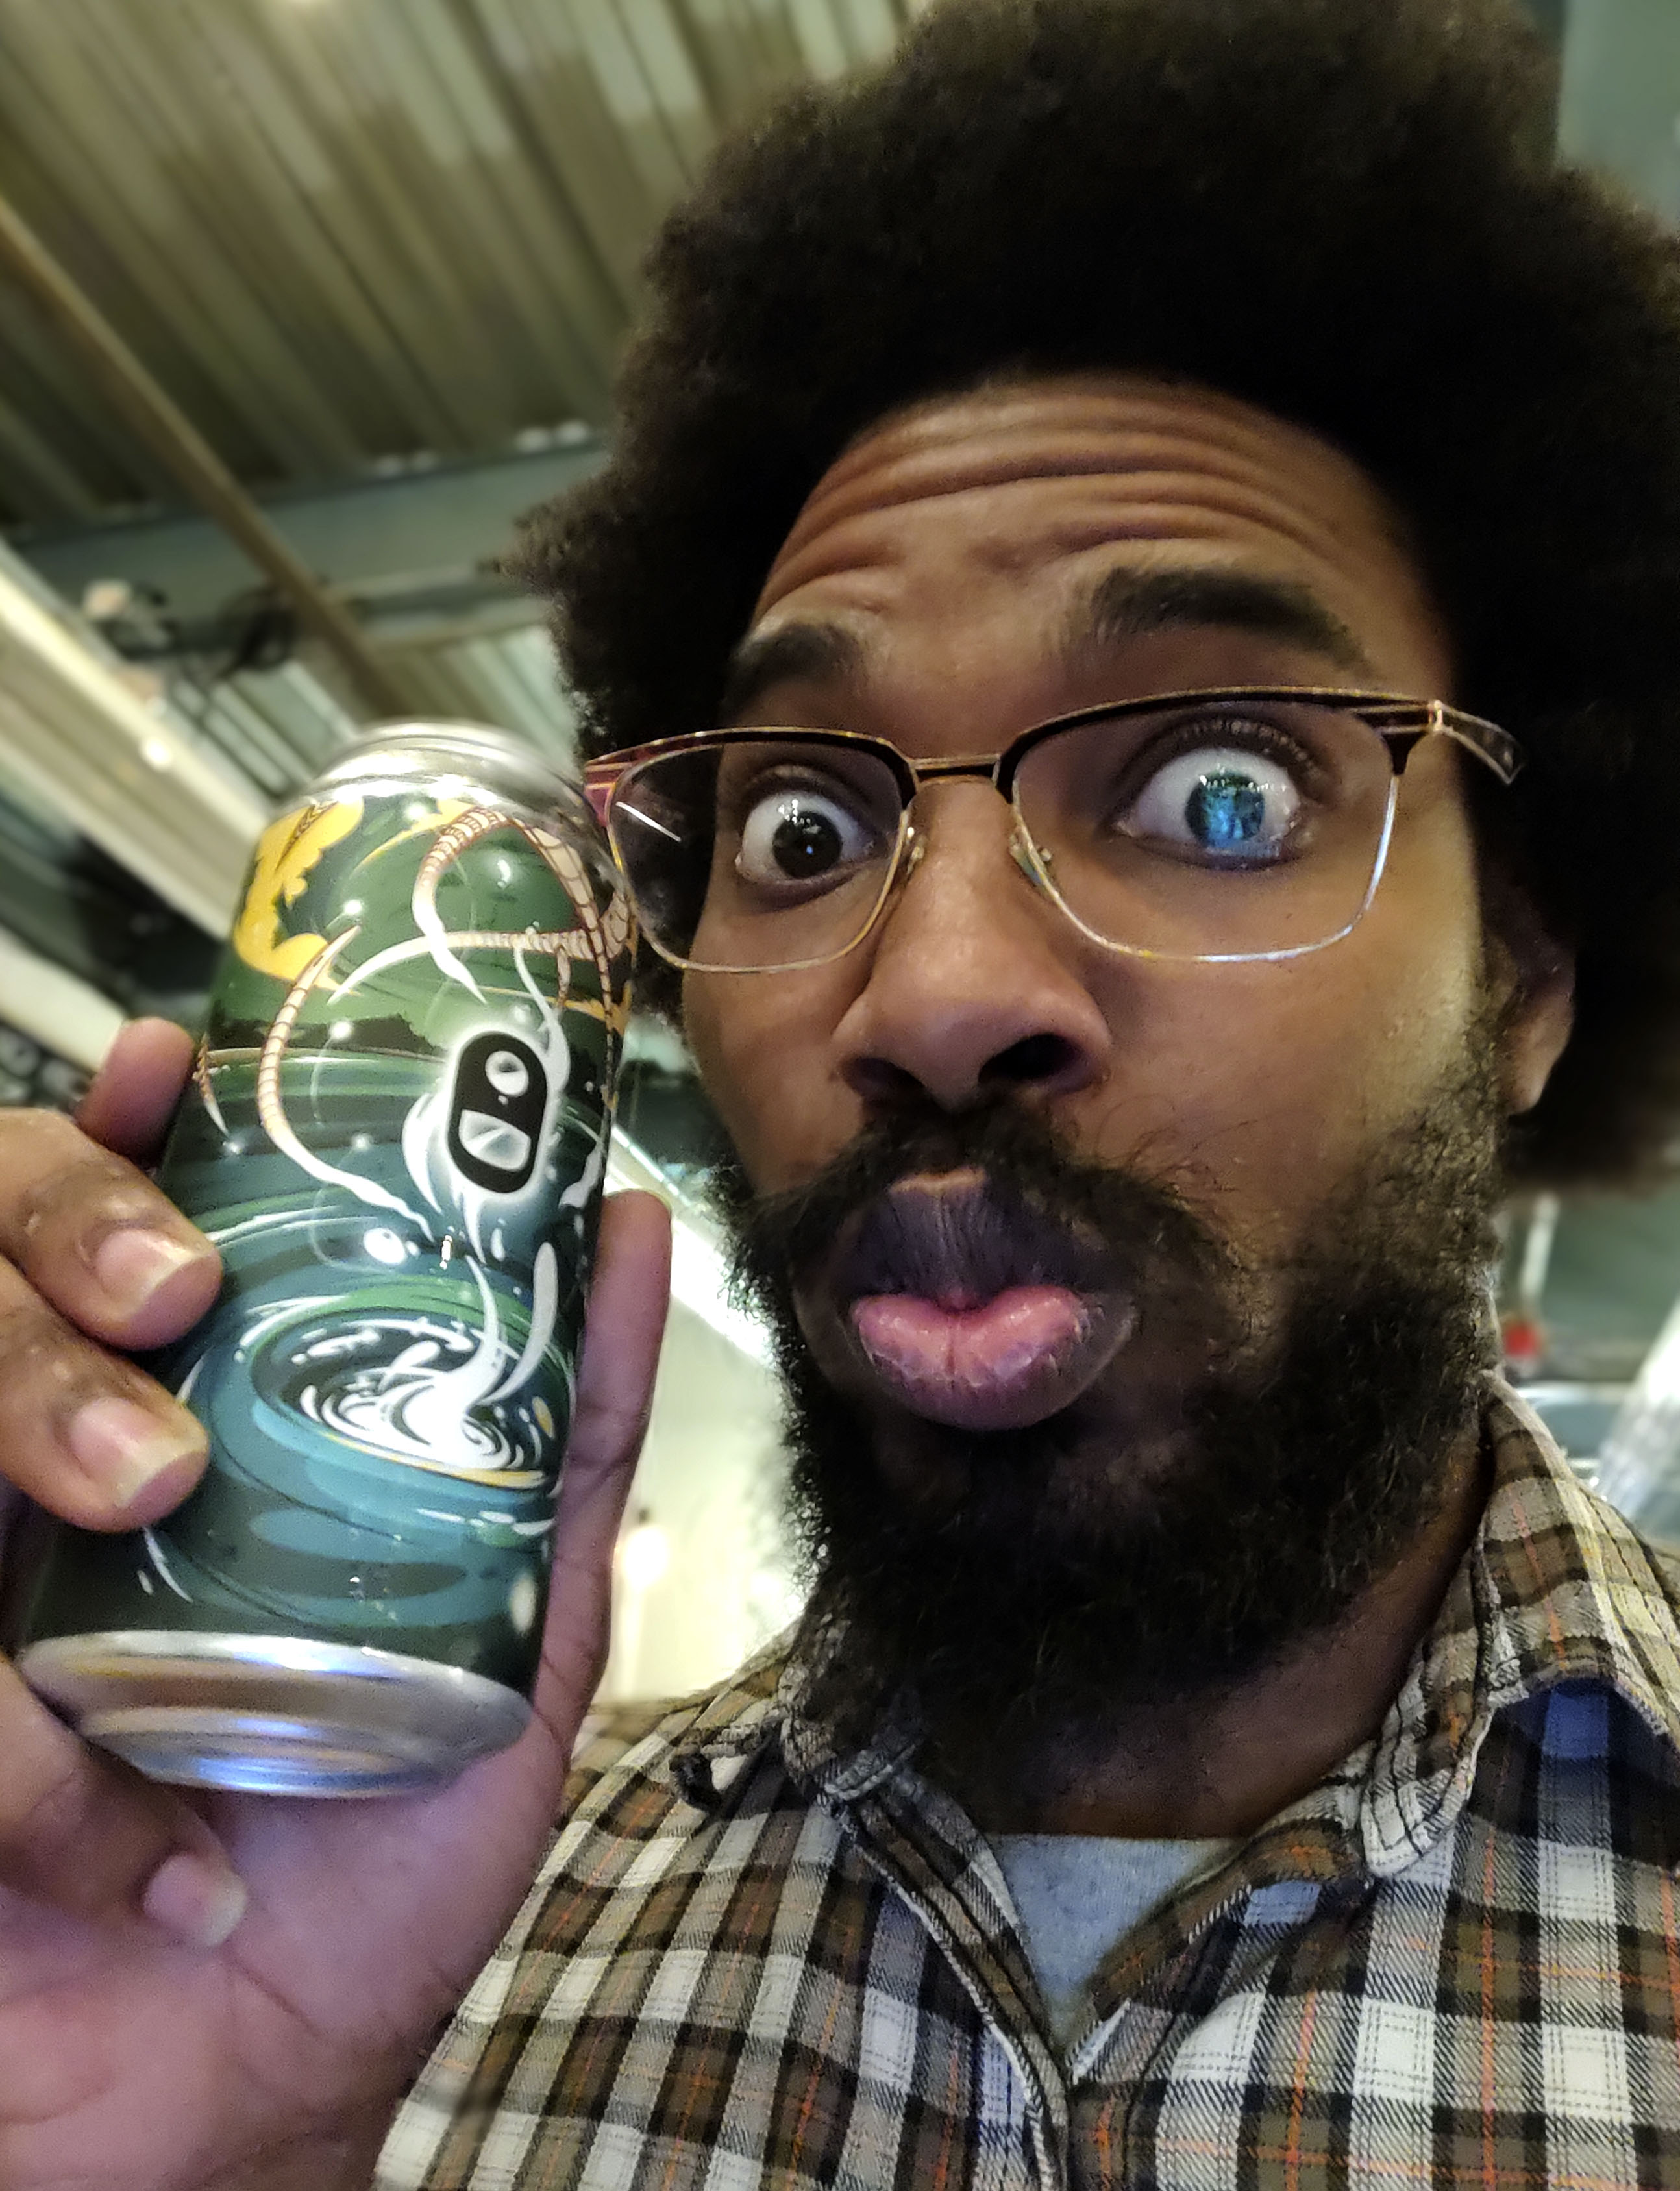 Selfie with a can of Portal Traverse